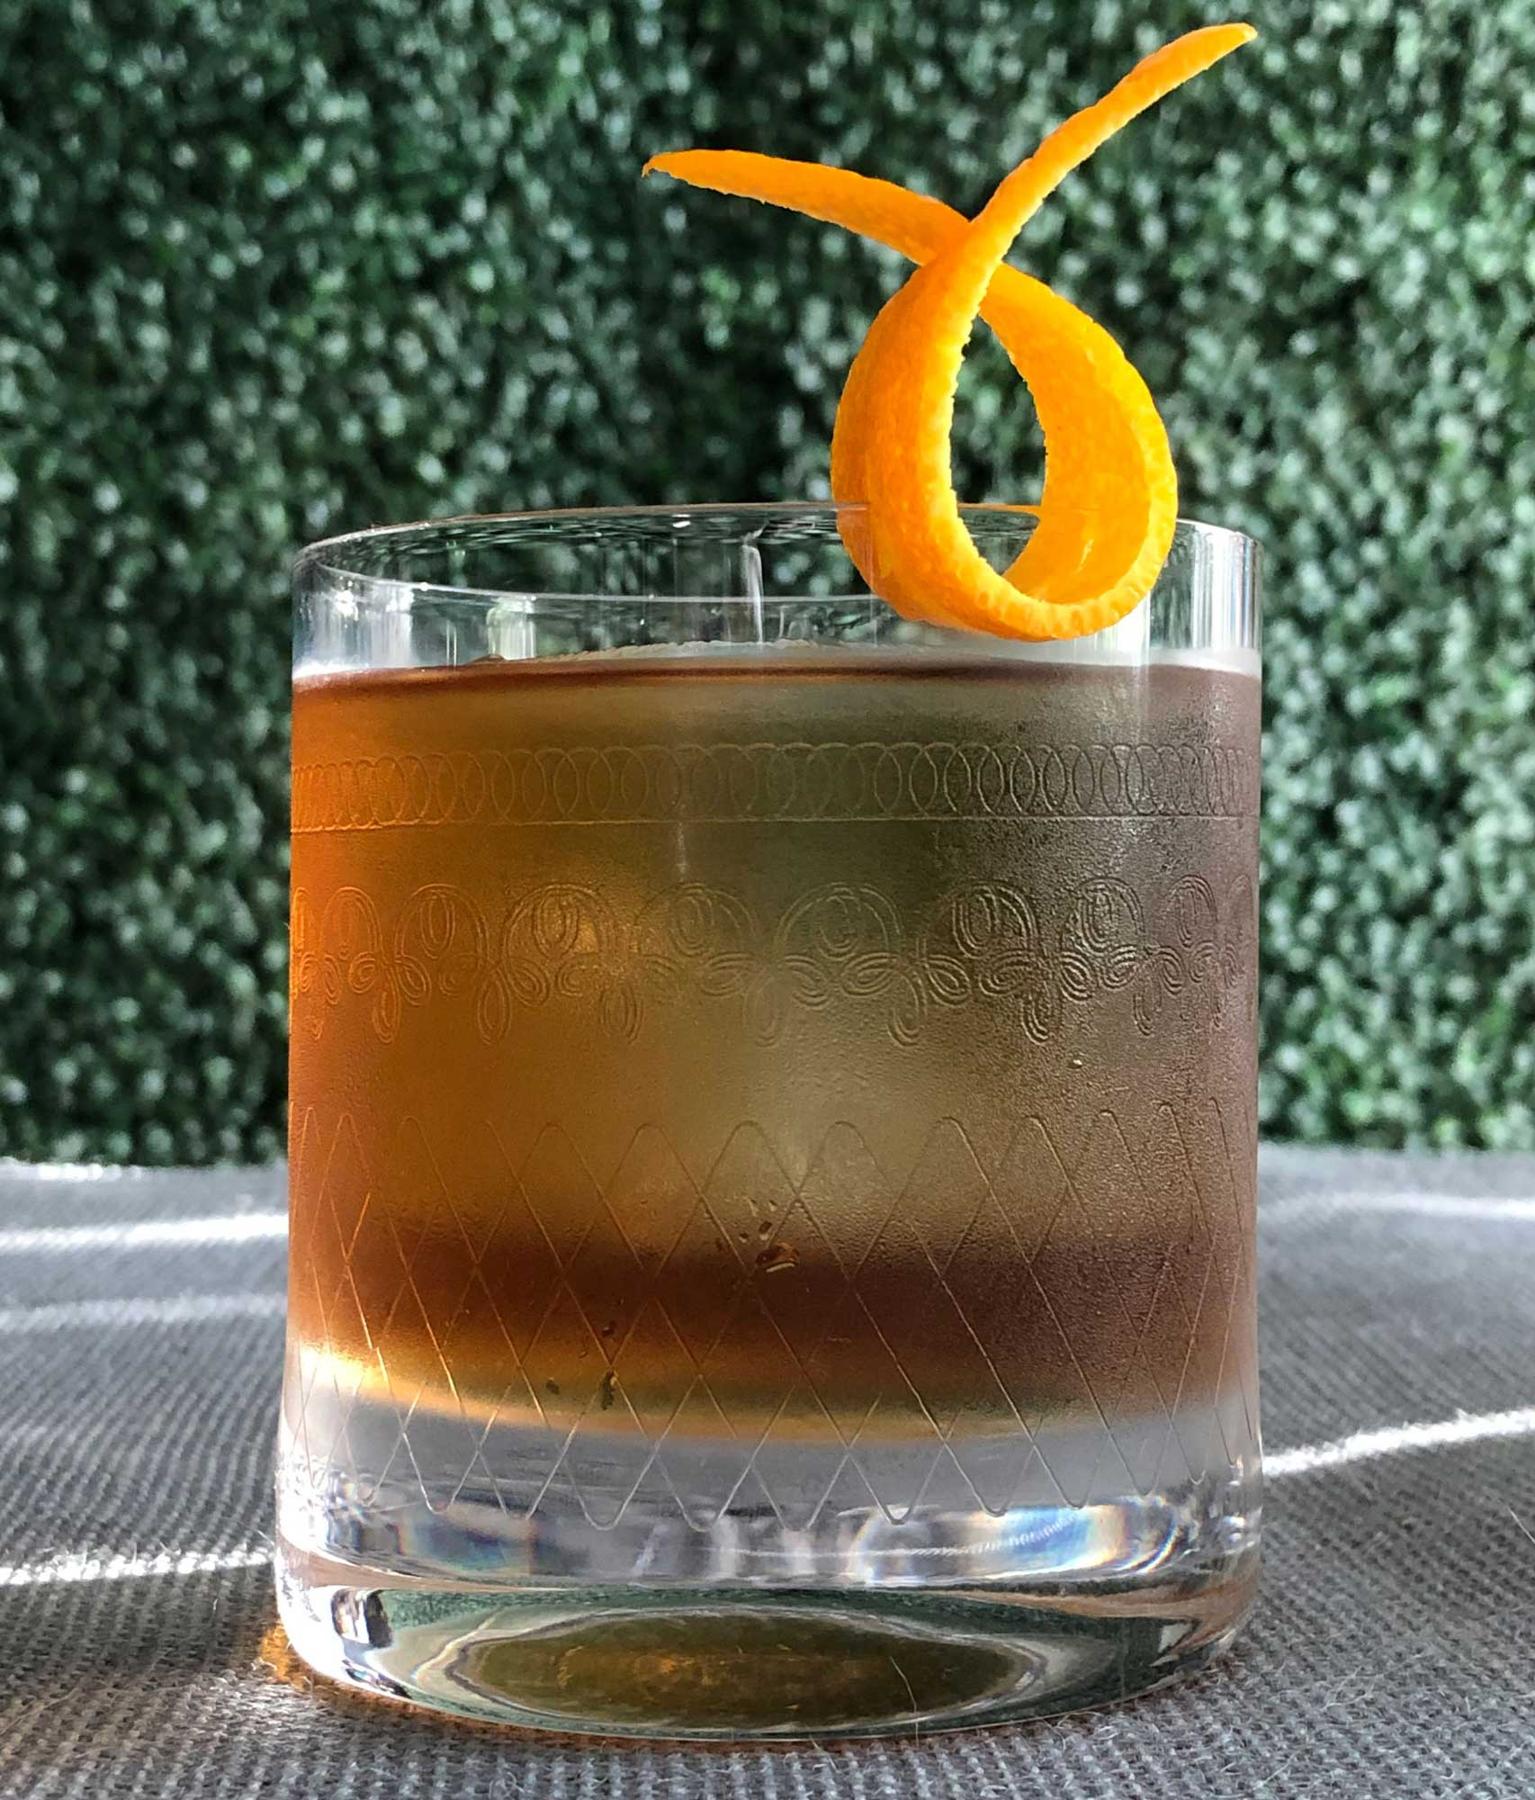 An example of the Piston Honda, the mixed drink (drink), by Brandon Wise, Sage Restaurant Group, featuring japanese whisky, Bonal Gentiane-Quina, maraschino liqueur, orange bitters, large ice cube, and orange twist; photo by Lee Edwards